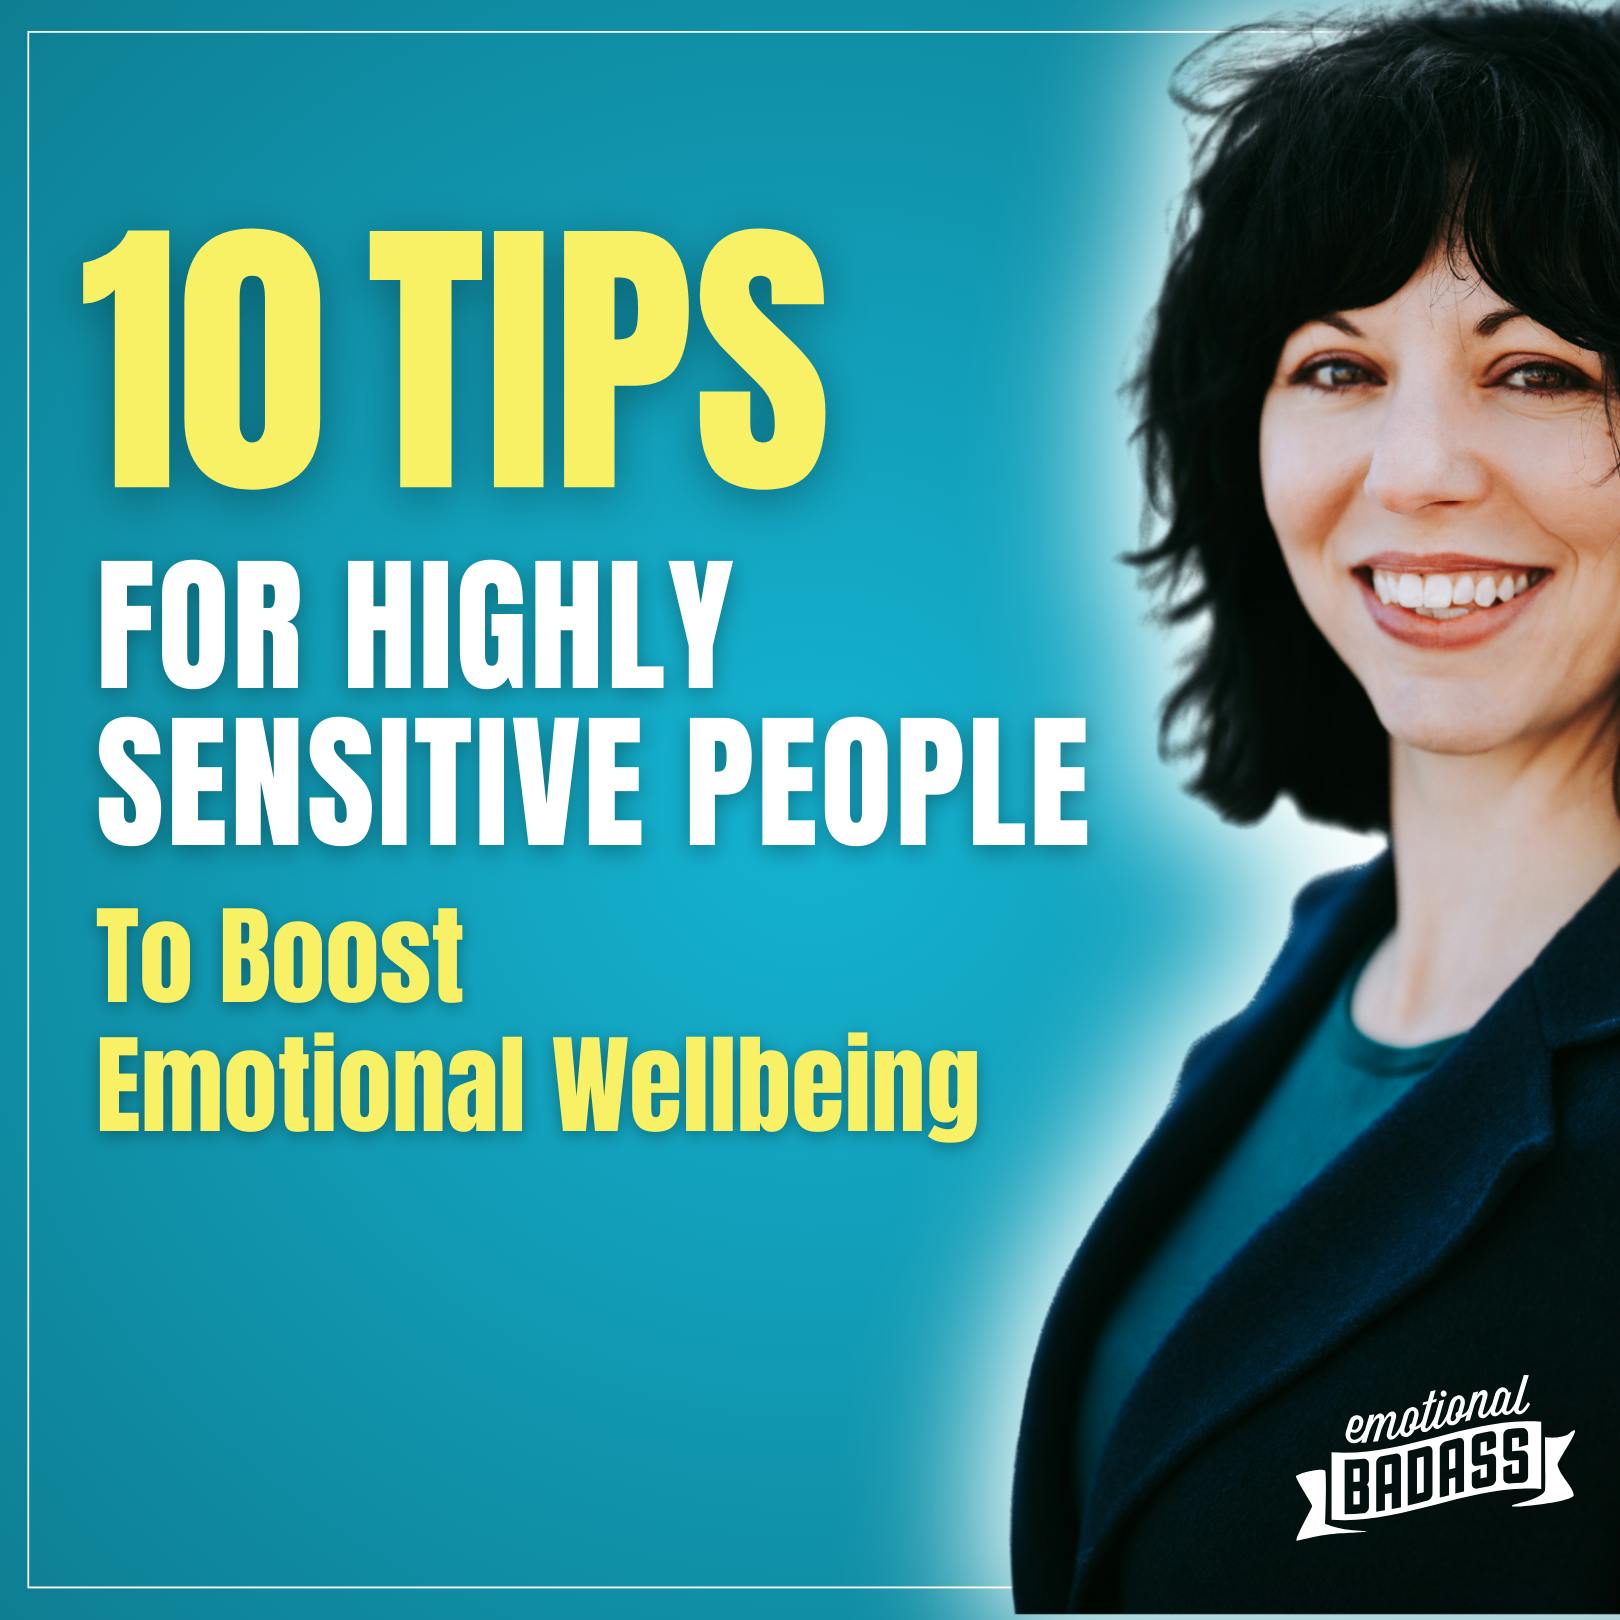 10 Tips for HSPs and Survivors to Boost Emotional Wellbeing